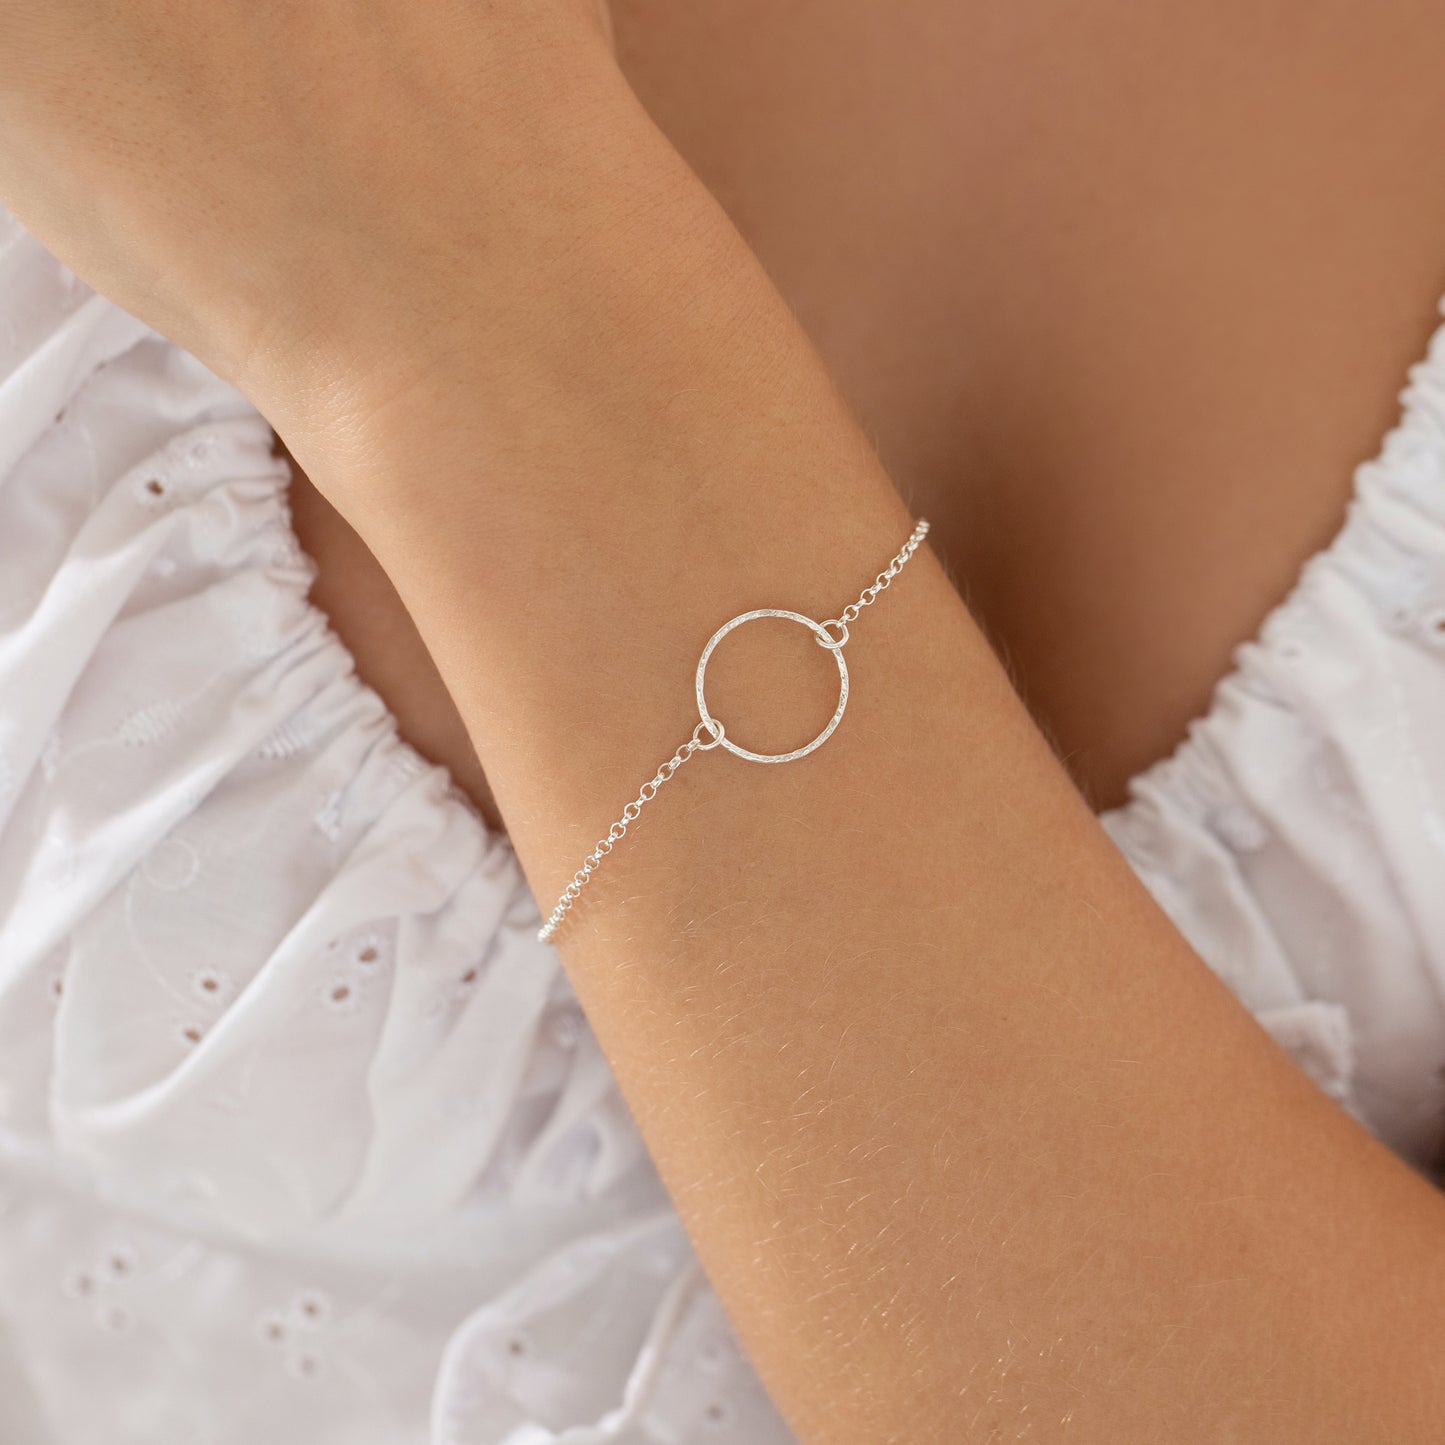 Hammered Circle Bracelet in Silver